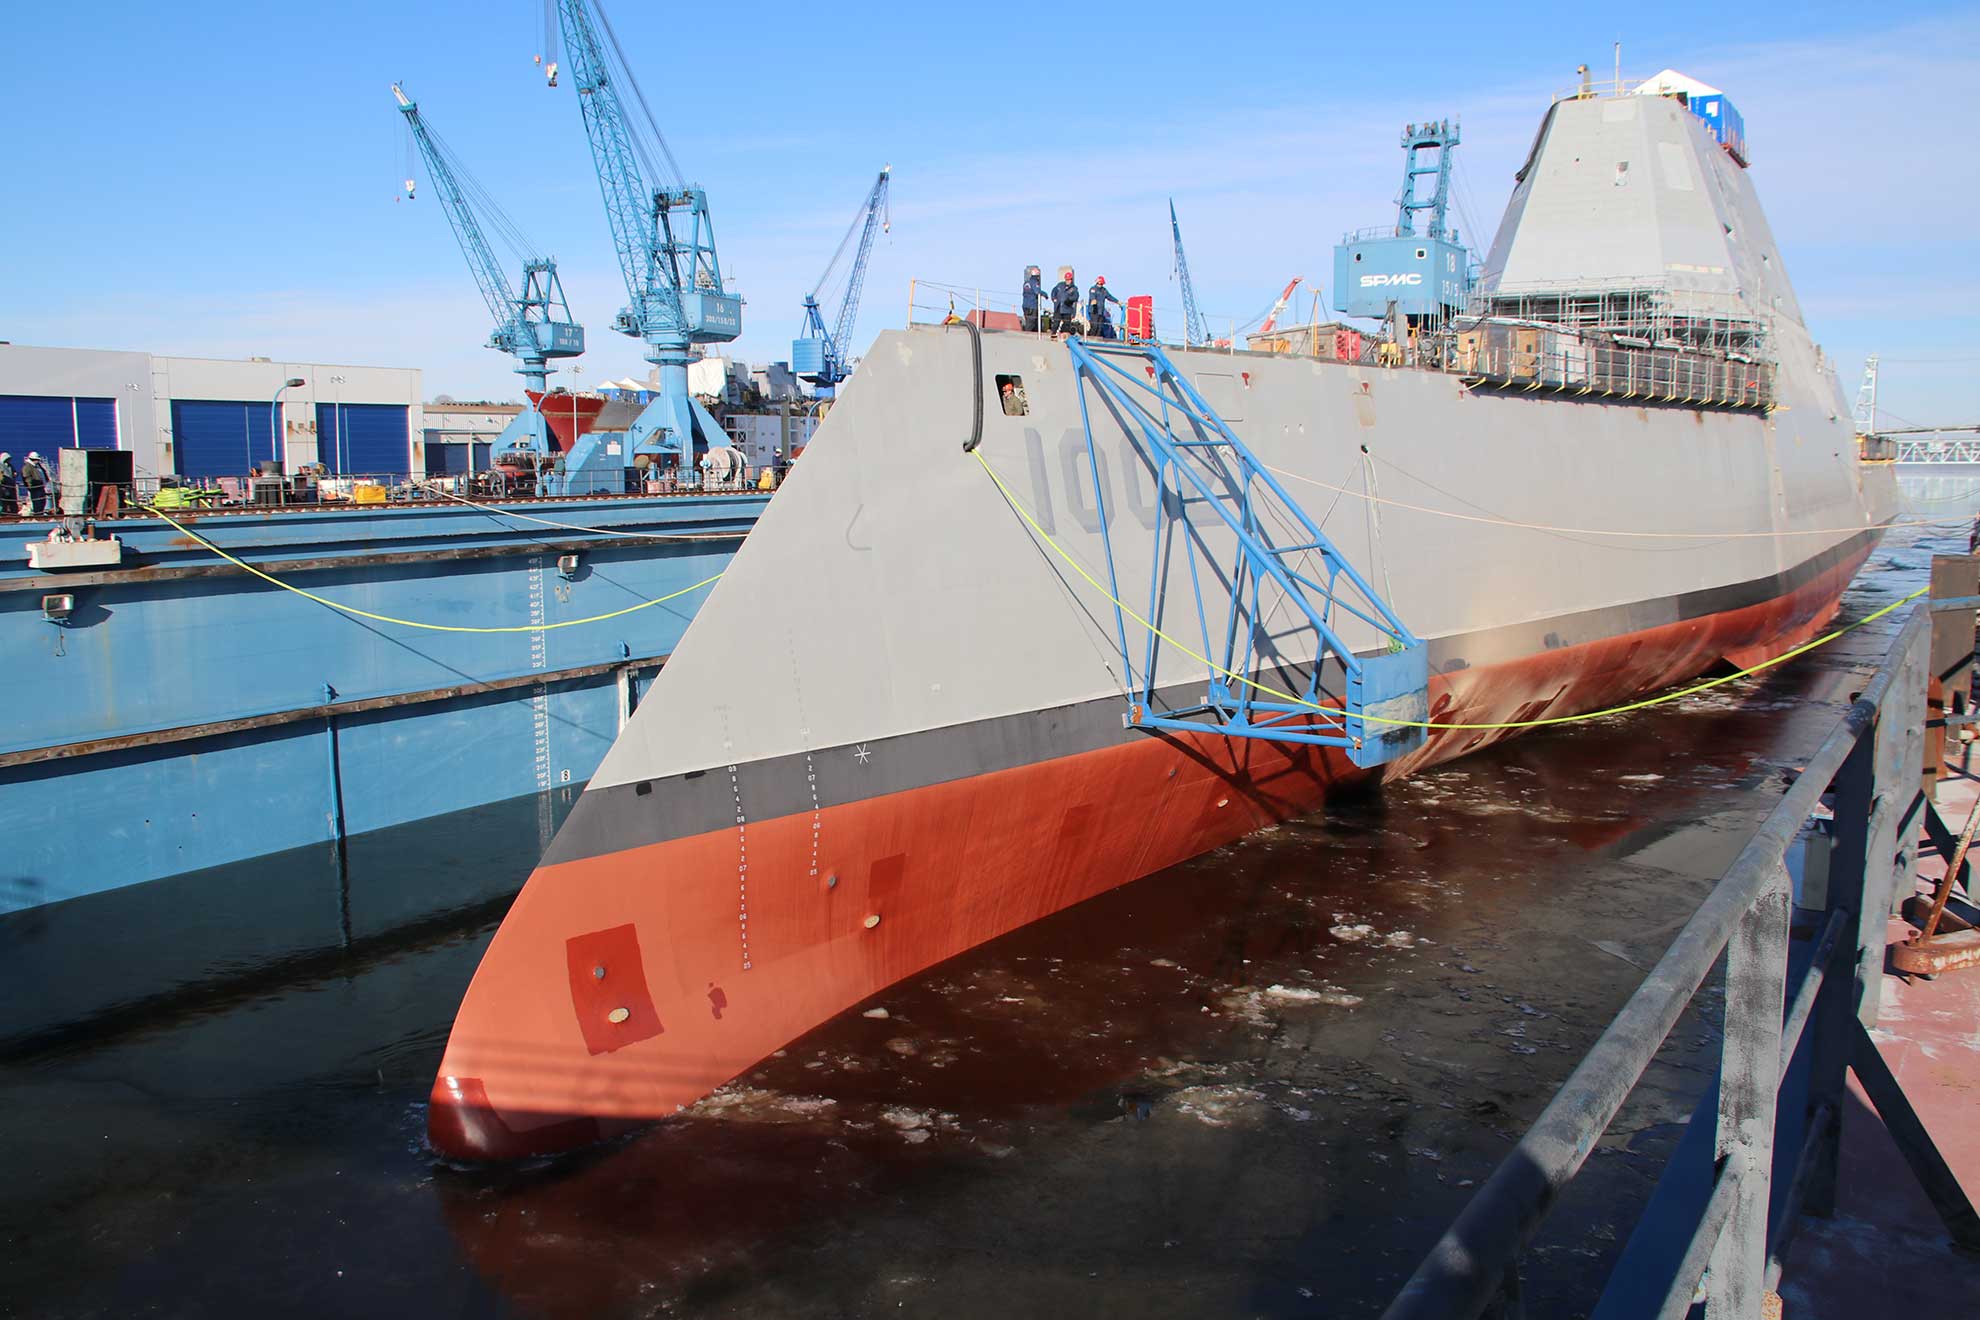 Bath, Maine Maine (Dec. 9, 2018) Following a multi-day process that includes moving the ship from the land level facility to the dry dock, the future USS Lyndon B. Johnson (DDG 1002) is made ready before flooding of the dry dock at General Dynamic-Bath Iron Works shipyard, and subsequent launching of the third Zumwalt-class destroyer -- U.S. Navy photo courtesy of General Dynamics-Bath Iron Works. -